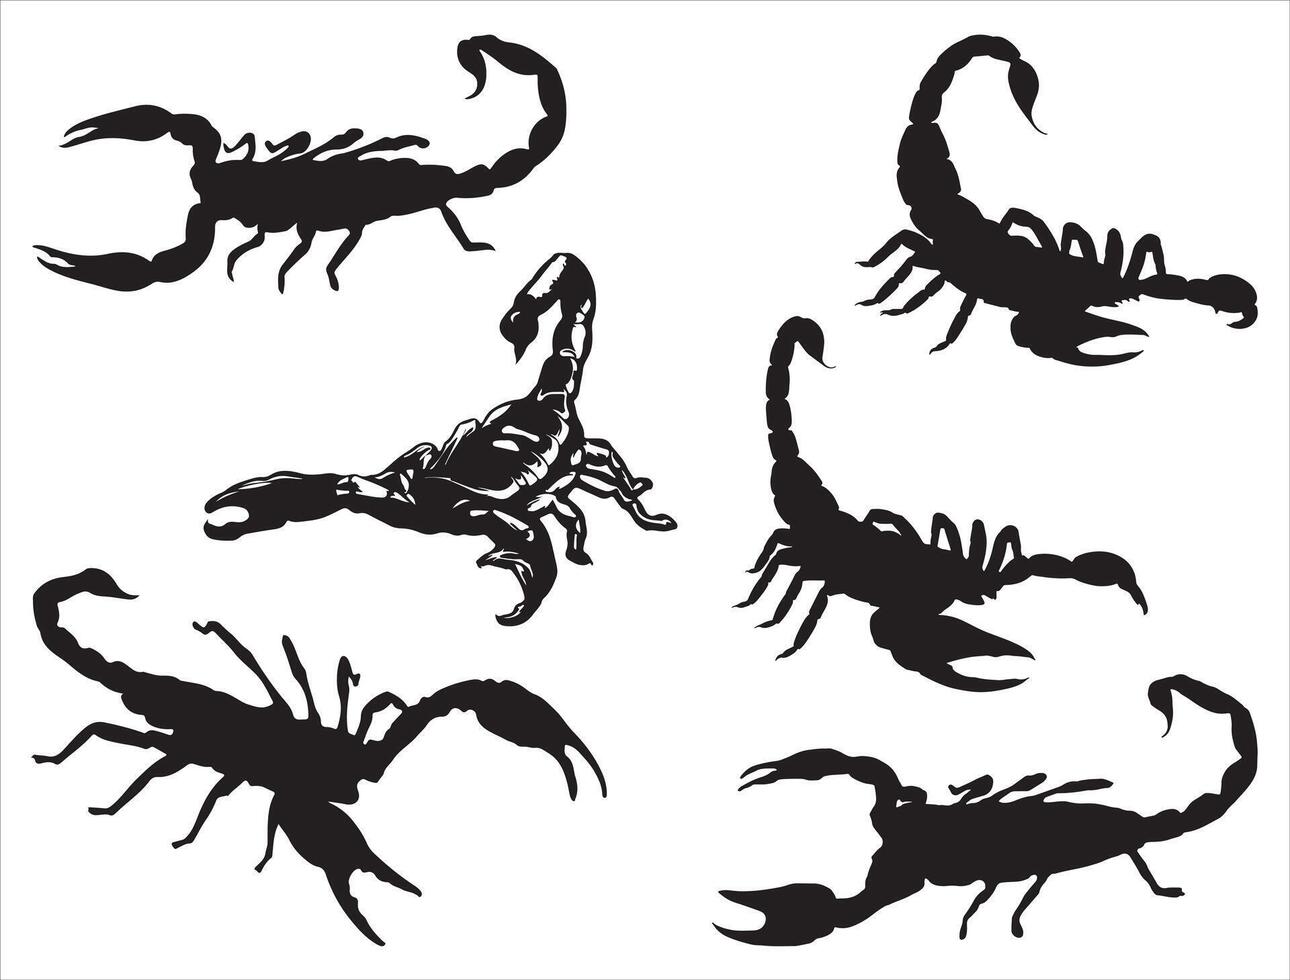 Scorpion silhouette on white background vector